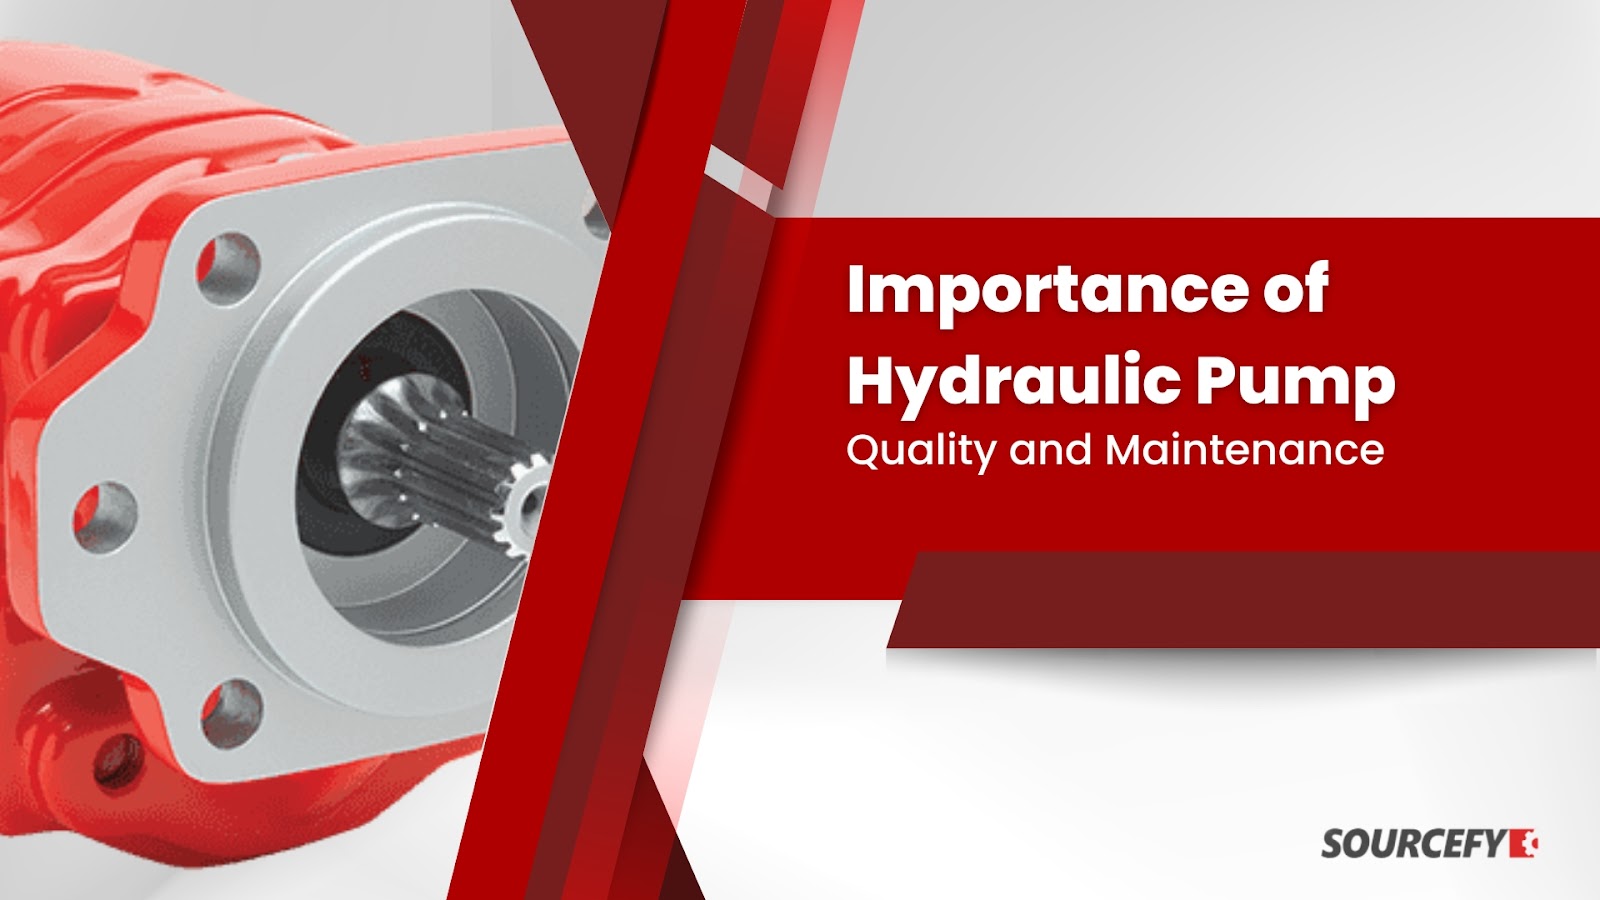 Importance of Hydraulic Pump Quality and Maintenance